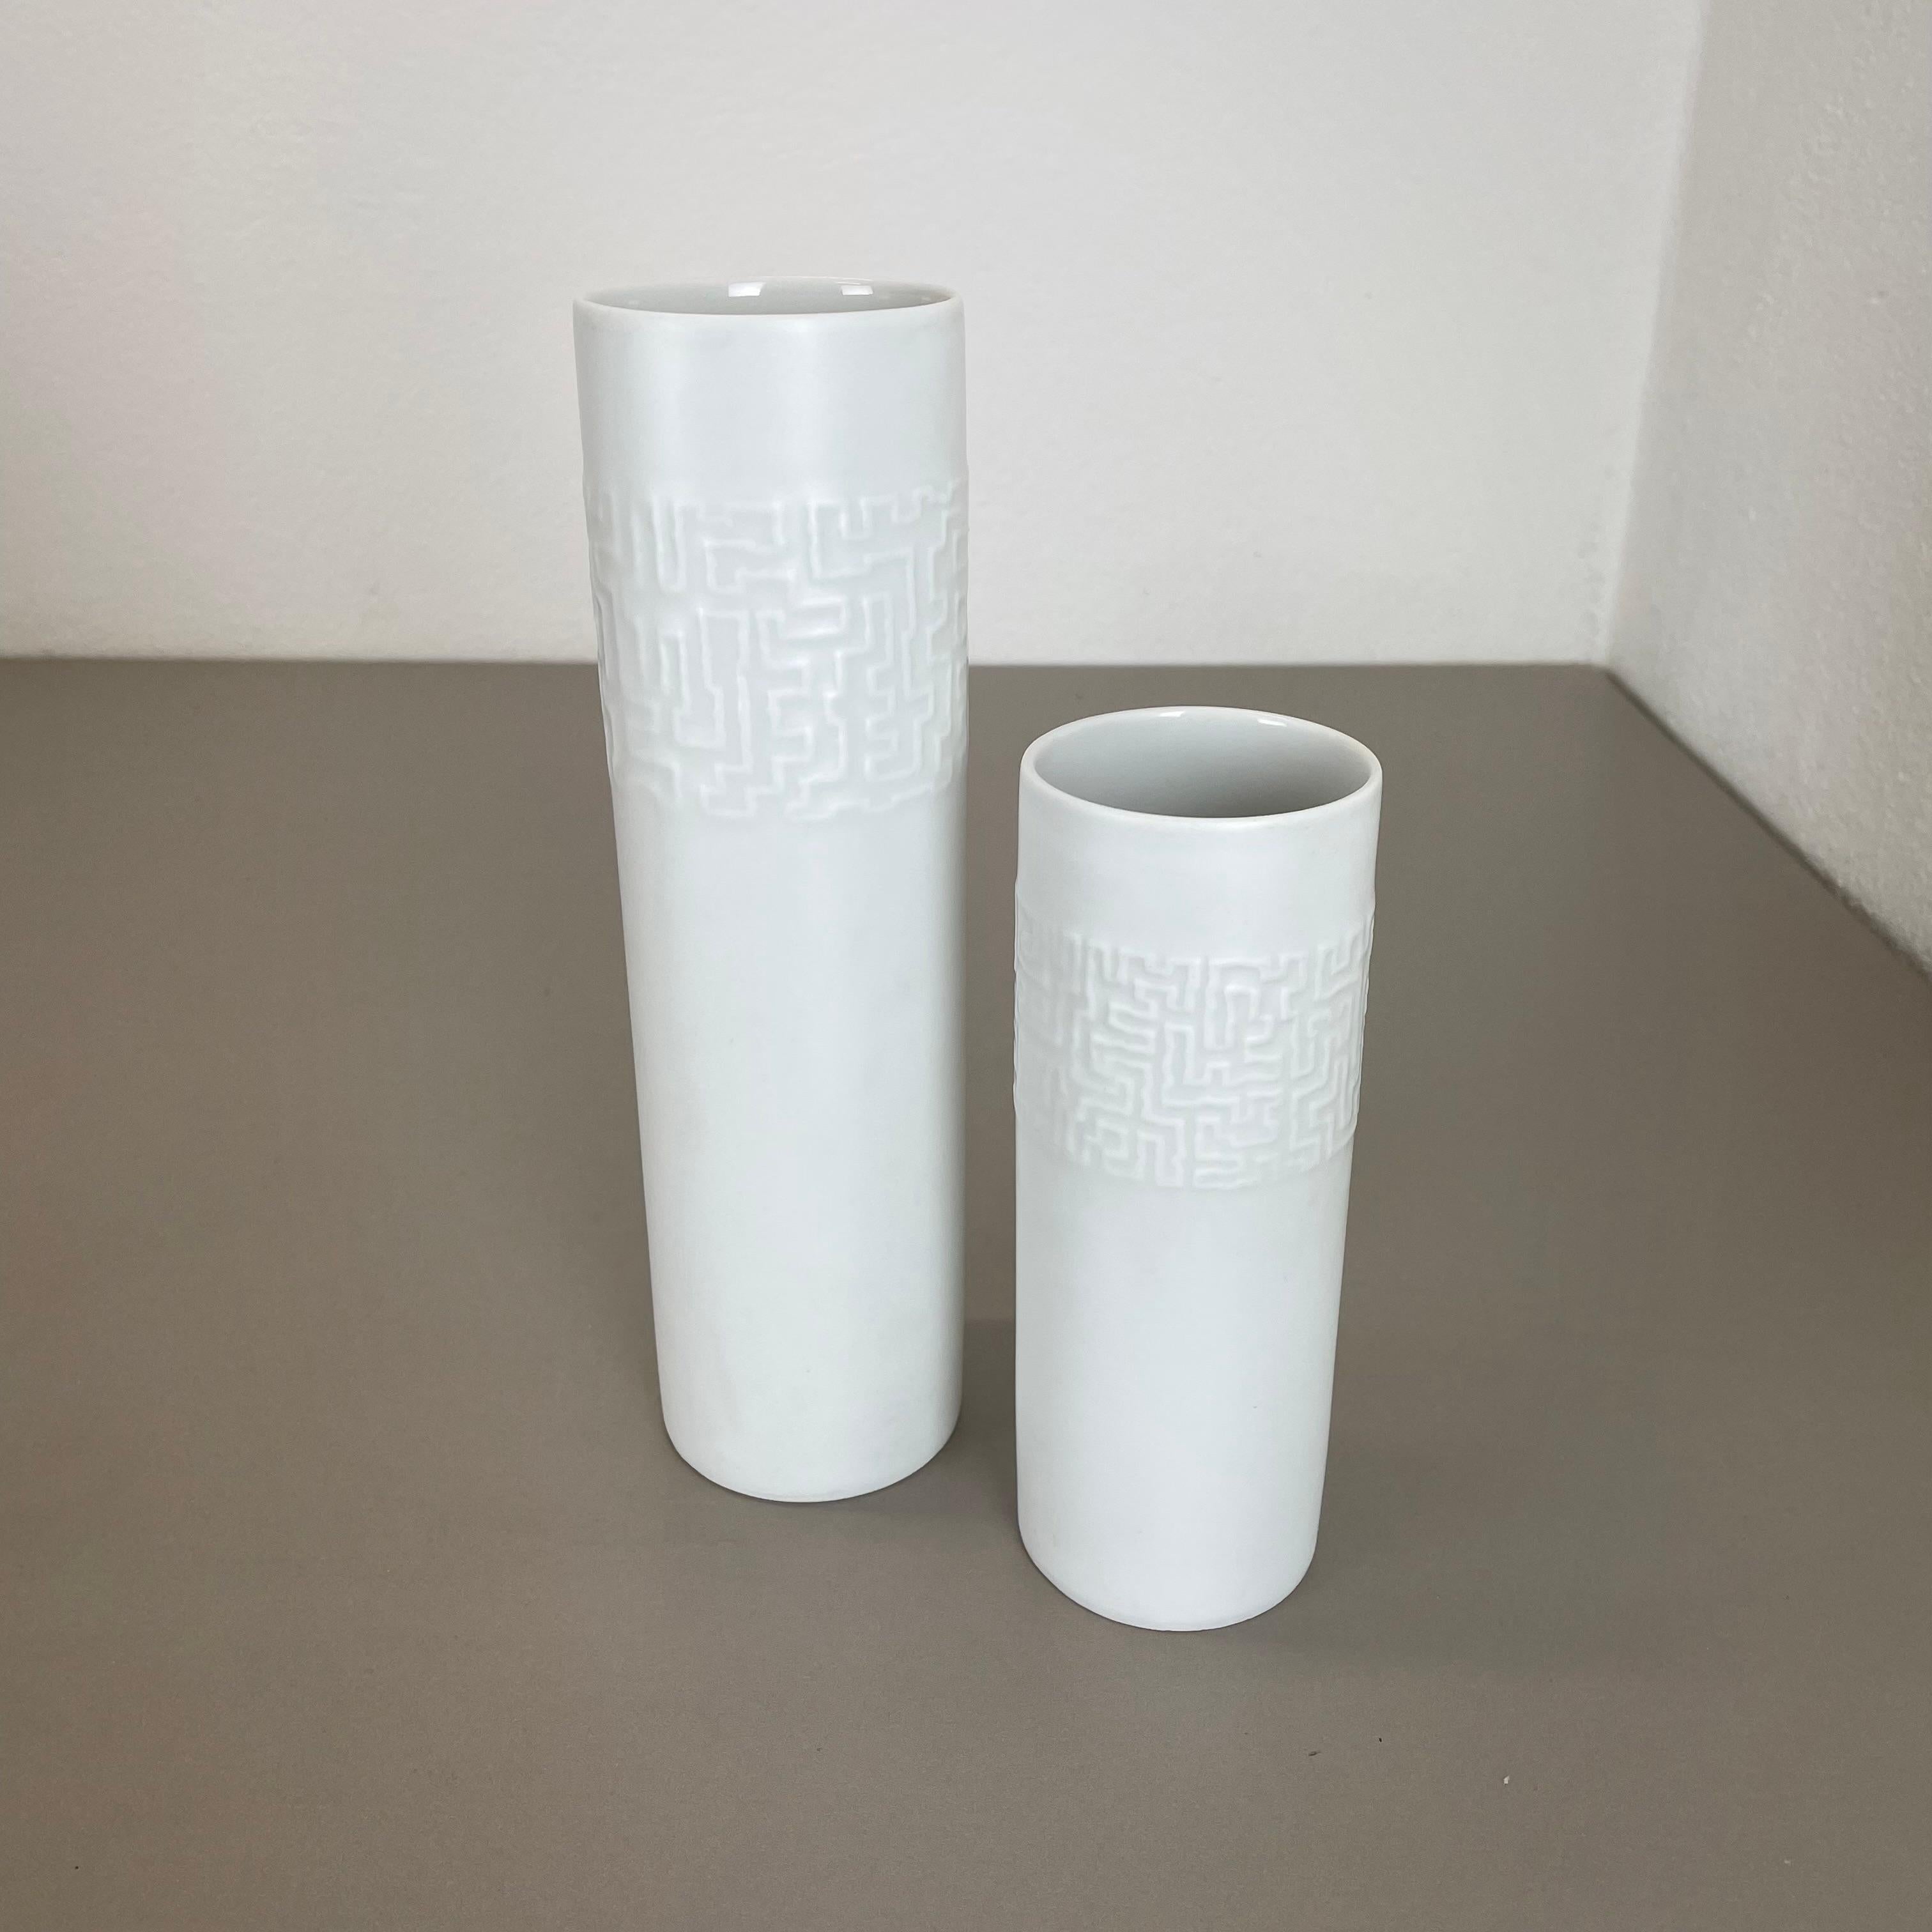 Set of 2 Abstract porcelain Vases by Cuno Fischer for Rosenthal, Germany, 1980s In Good Condition For Sale In Kirchlengern, DE